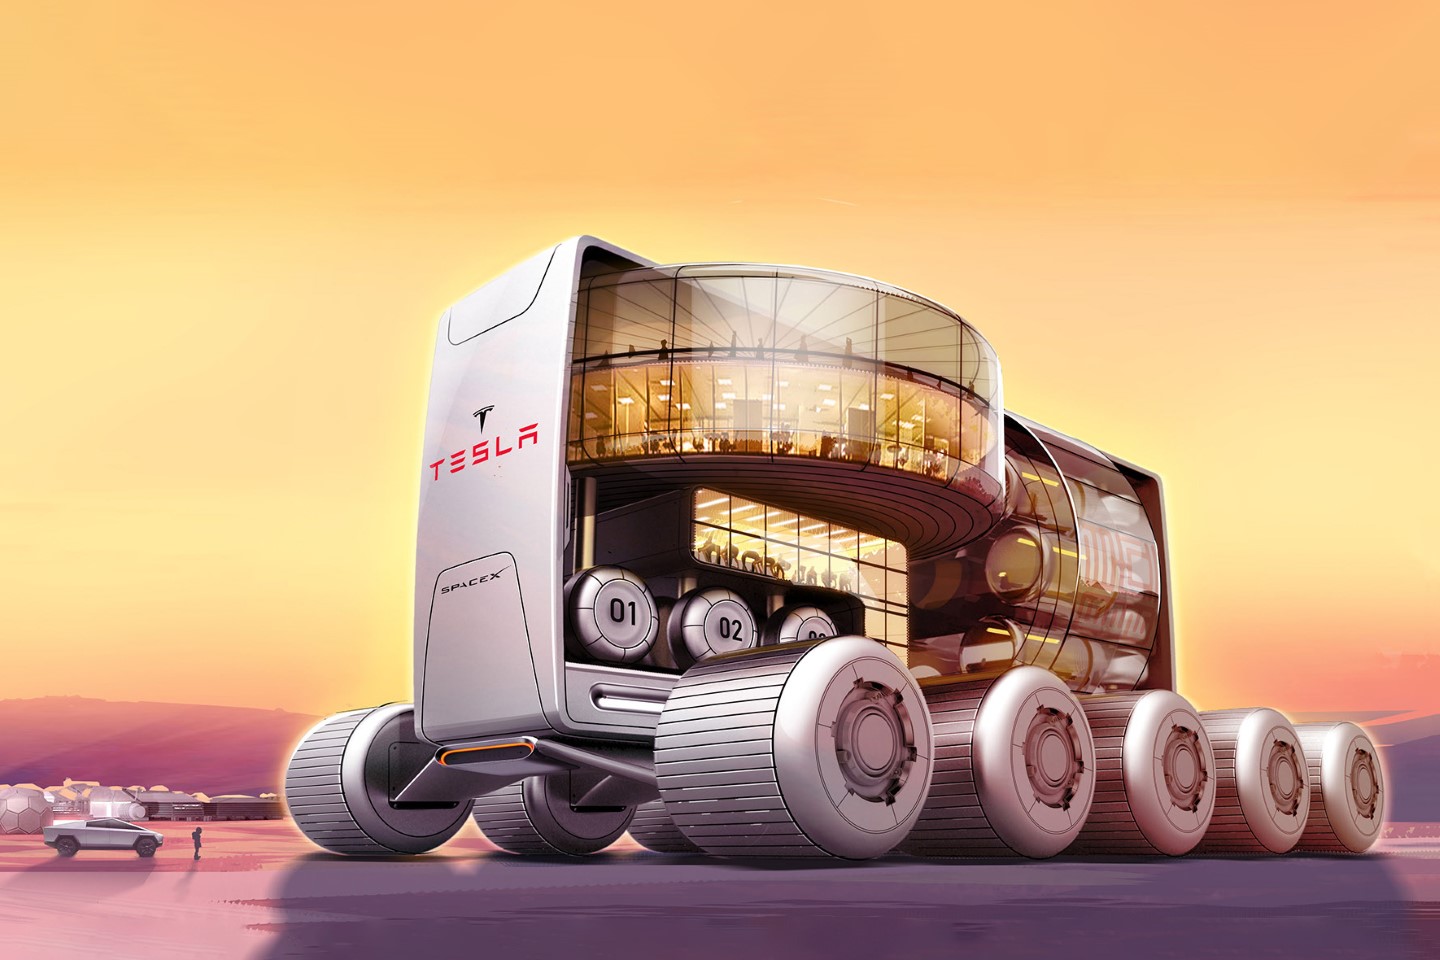 #This massive Tesla Hotel-on-wheels concept paints a sci-fi picture of luxury life on Mars